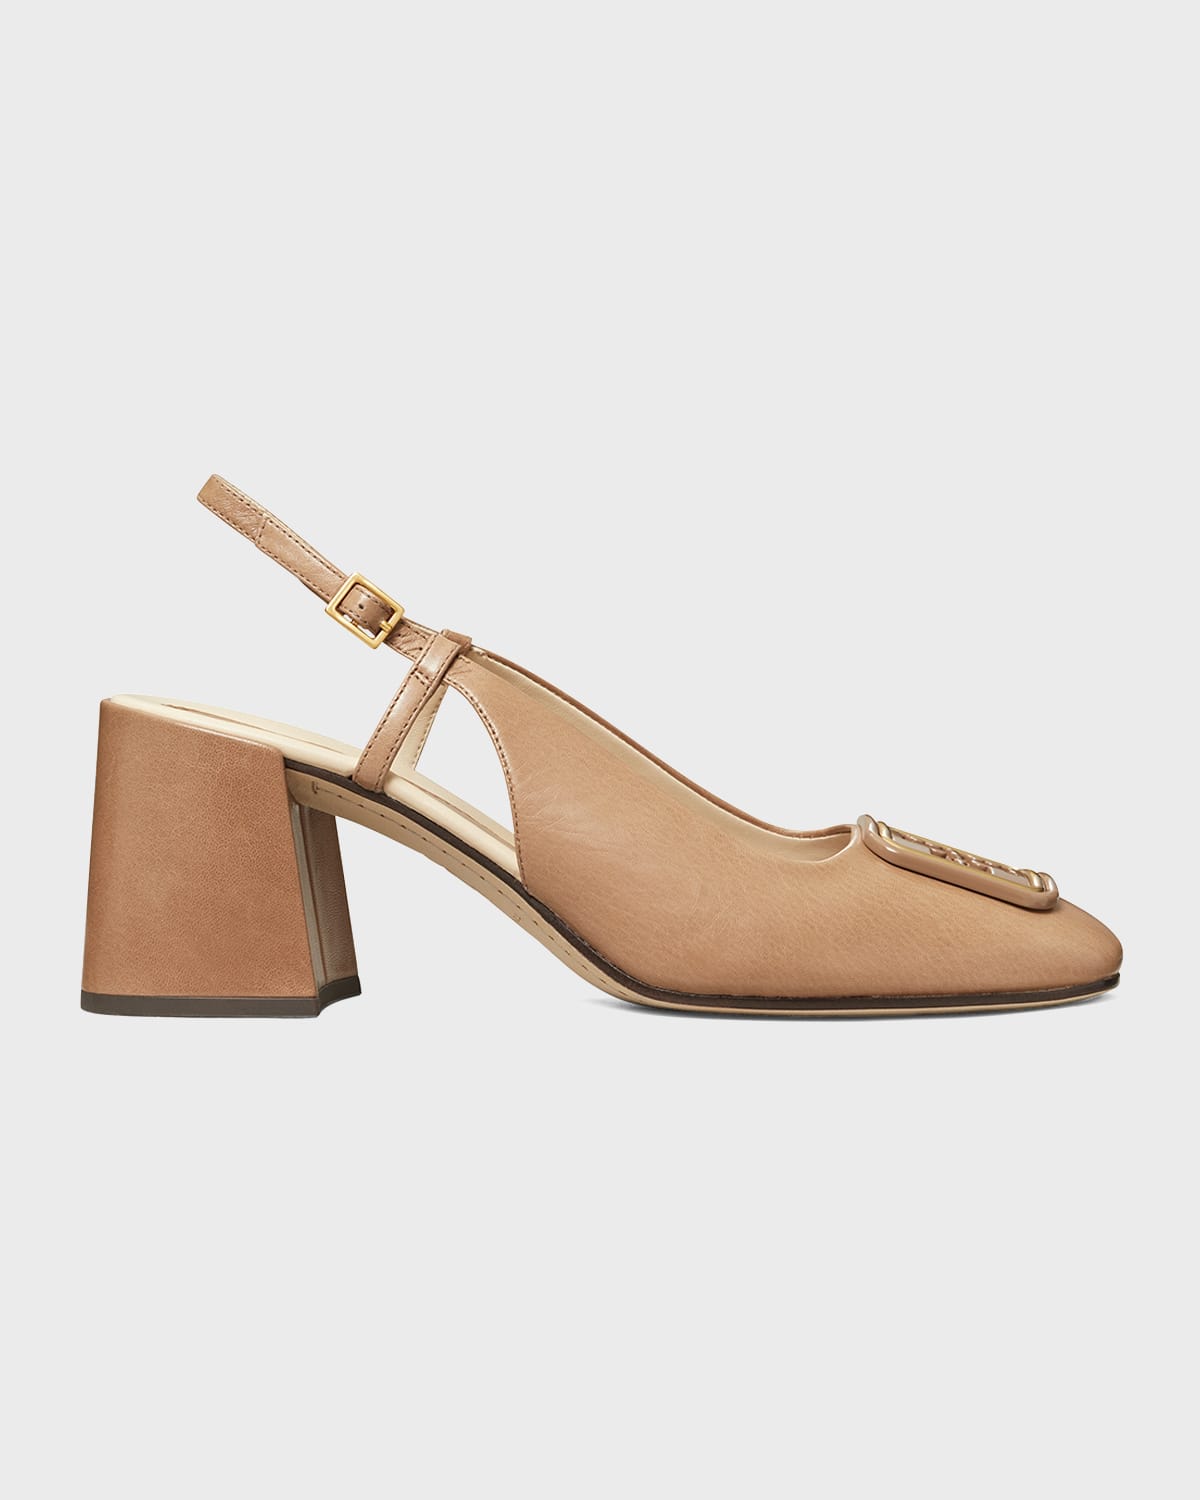 Tory Burch Almond Shoes | Neiman Marcus